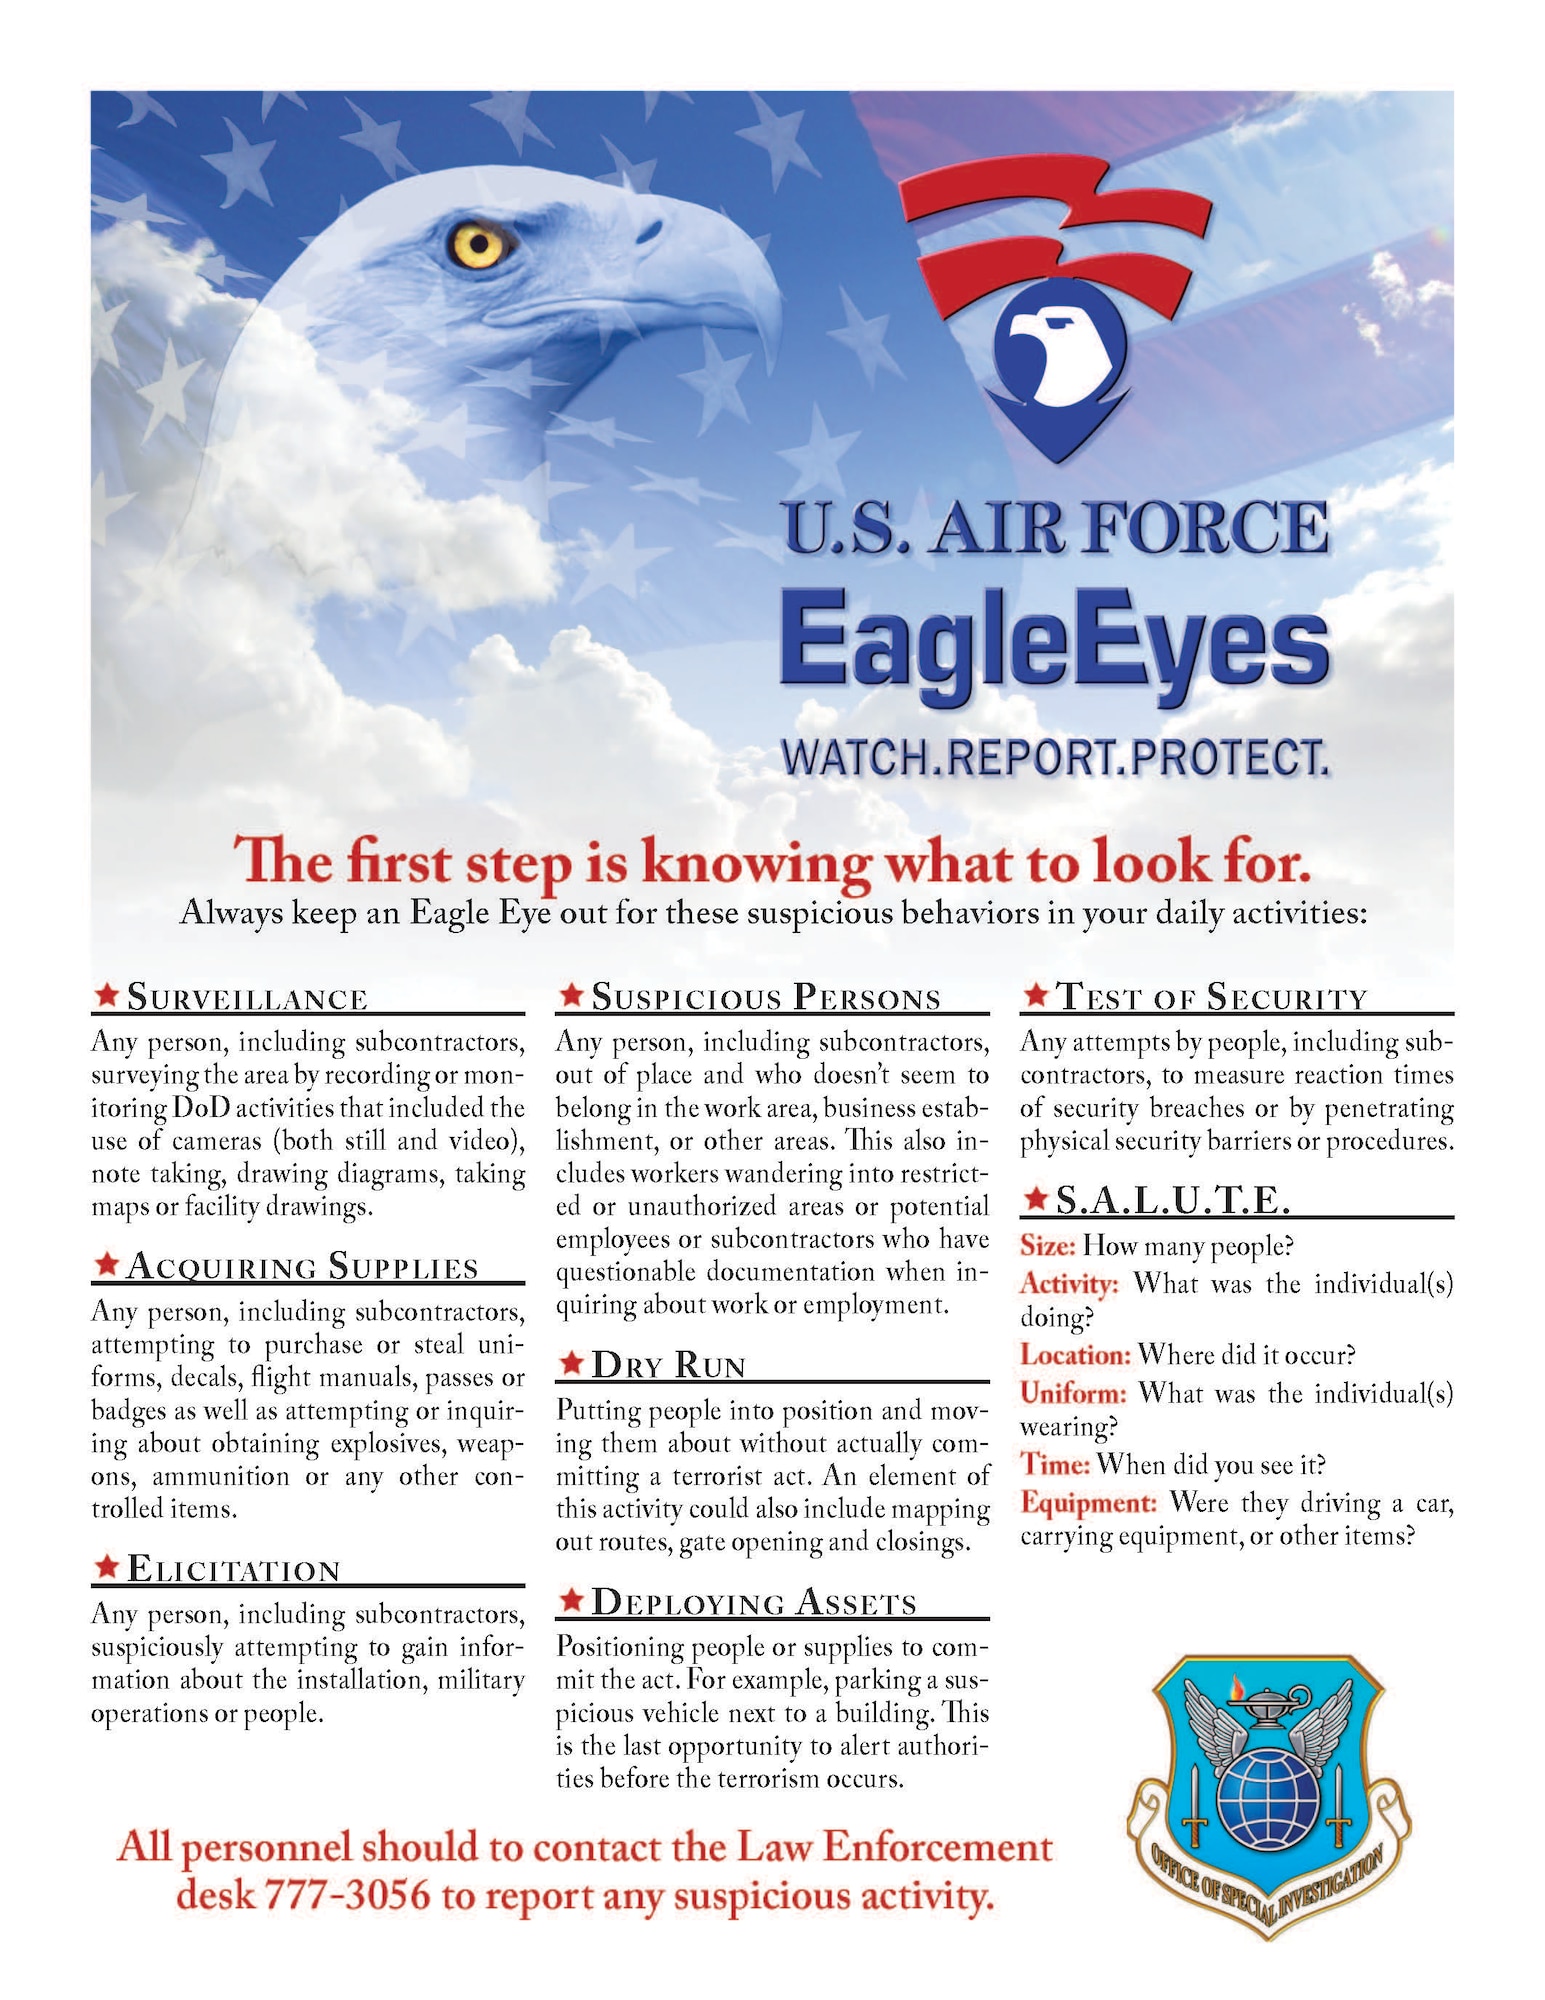 At Hill Air Force Base, personnel can report any and all suspicious activities by calling 801-777-3056.  Suspicious activities observed and then reported through the Eagle Eyes program are immediately shared with local law enforcement agencies, counter-terrorism personnel and military commanders for rapid assessment and investigation.